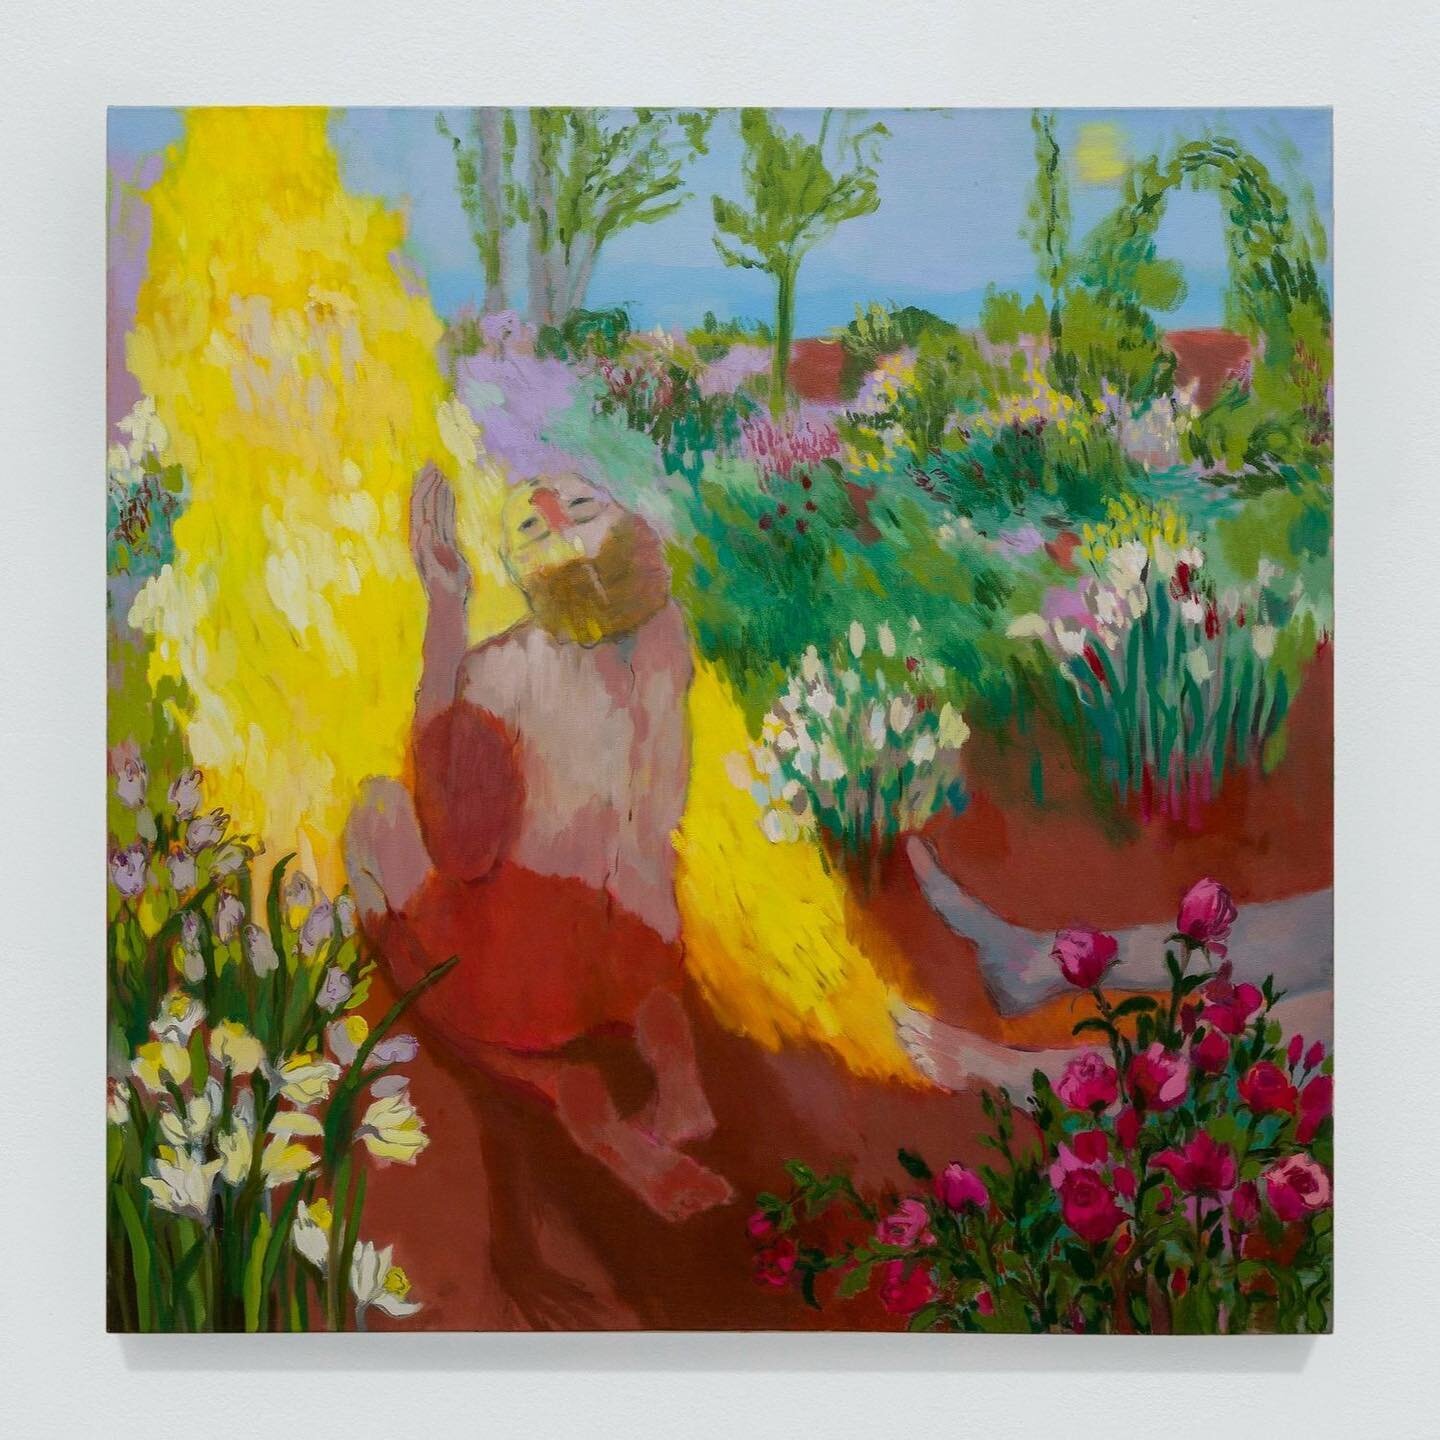 Revelation in the Garden is on now @wallspacegallery 
I will be there this Thursday April 27th from 5-7 giving an artist talk at 5:30. All are welcome!
.
.
Shown here:
Revelation in the Garden / oil on canvas / 48x48 inches / Available through @walls